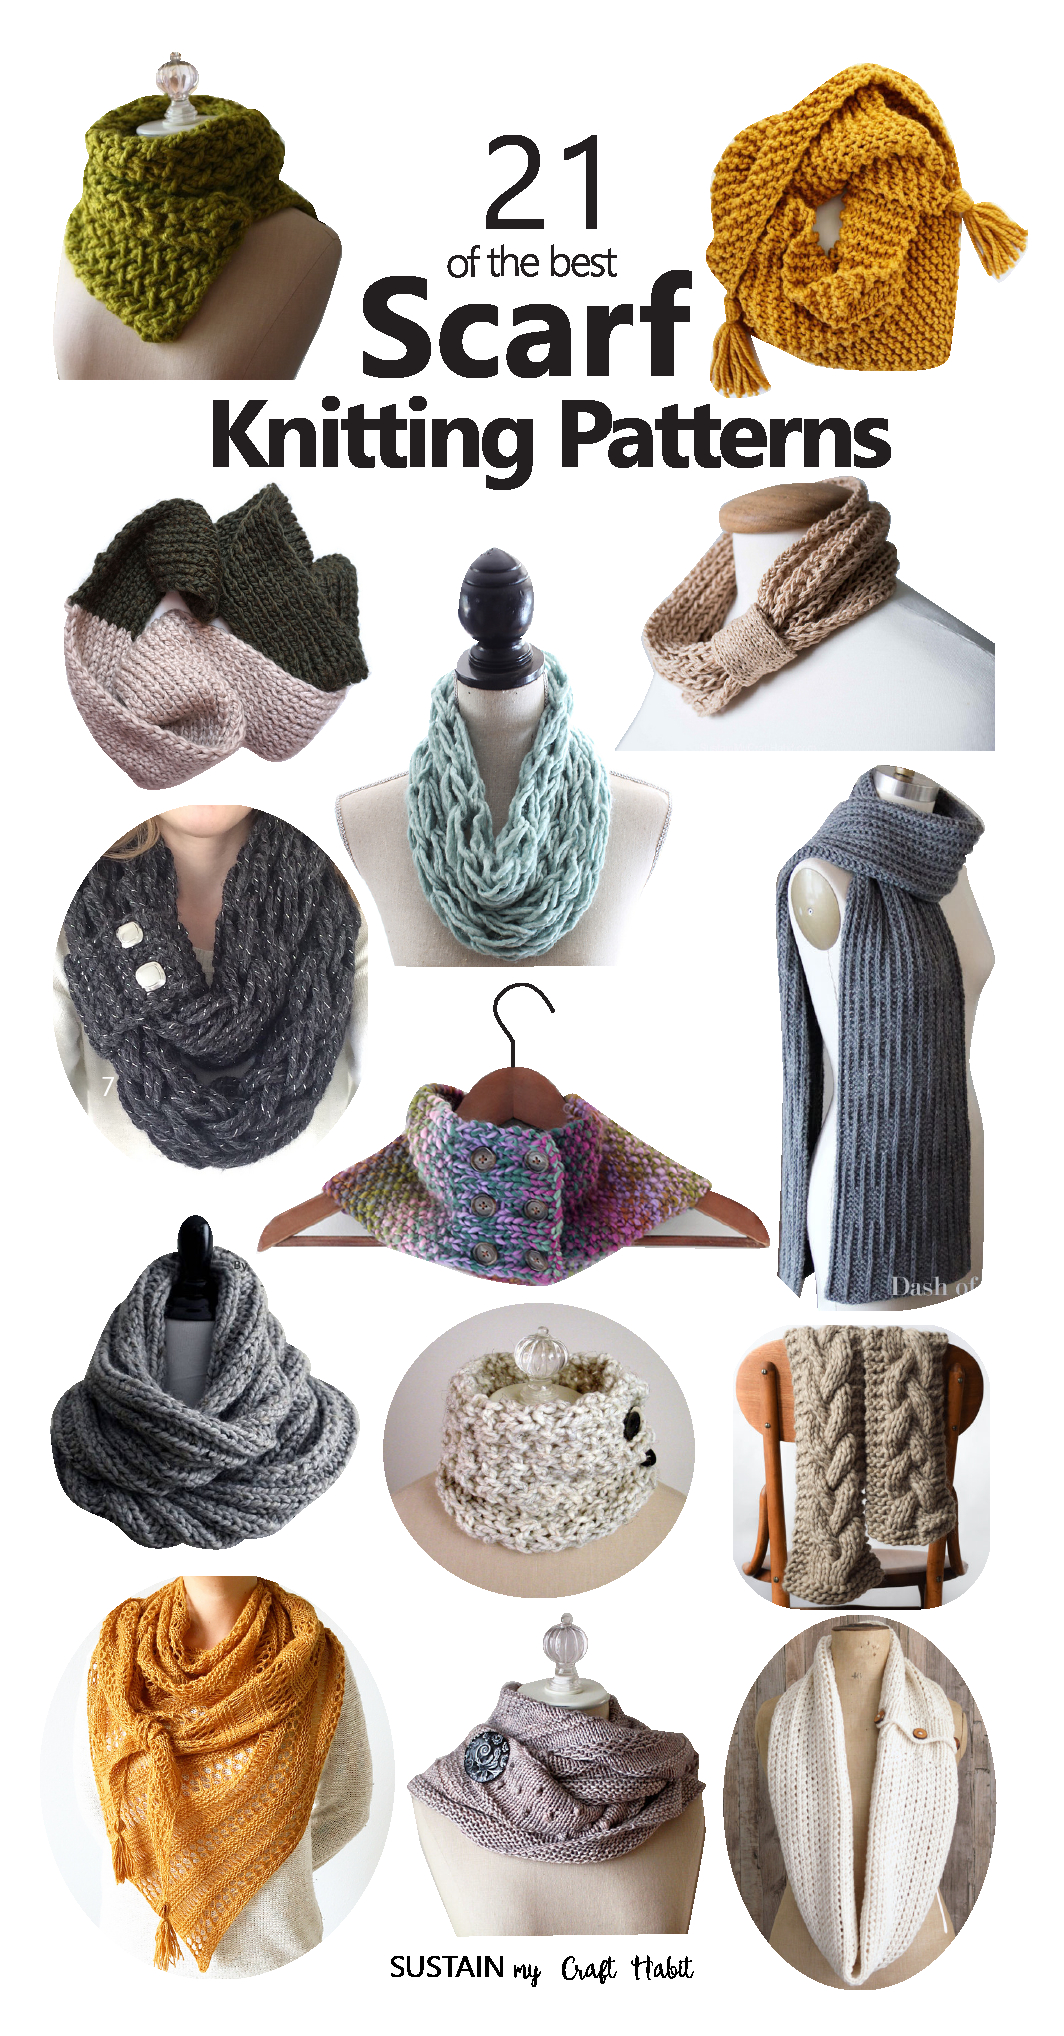 Free Knitting Patterns For Shrugs And Wraps 21 Of The Best Scarf Knitting Patterns Sustain My Craft Habit